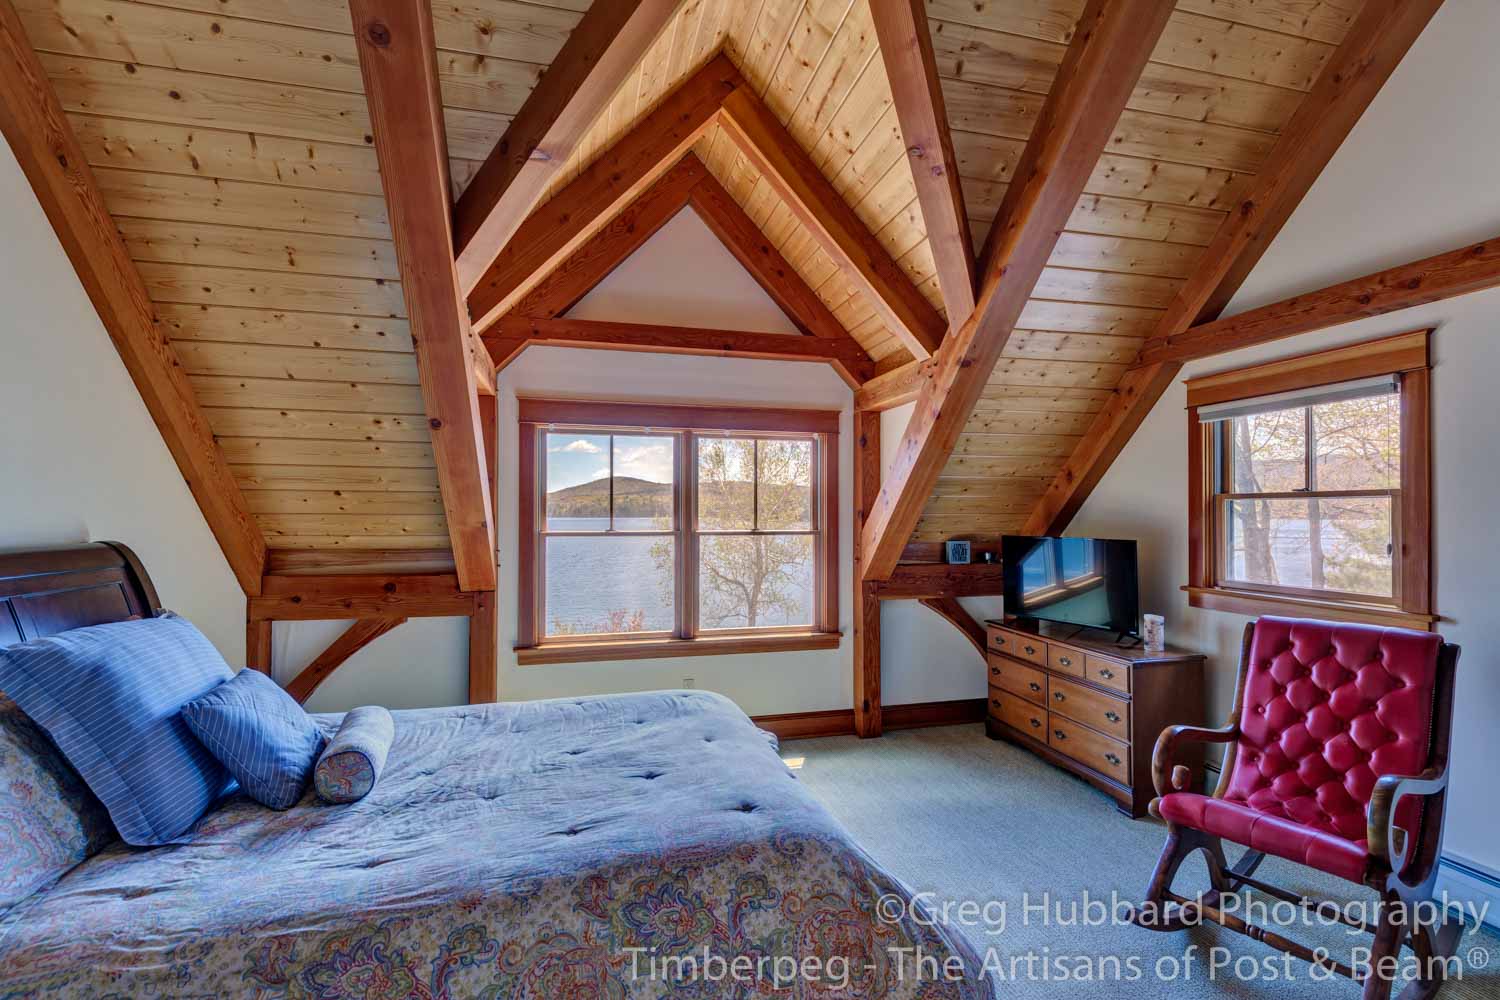 Birch Point T00352 bedroom with timber frame ceiling and view over water of lake sunapee